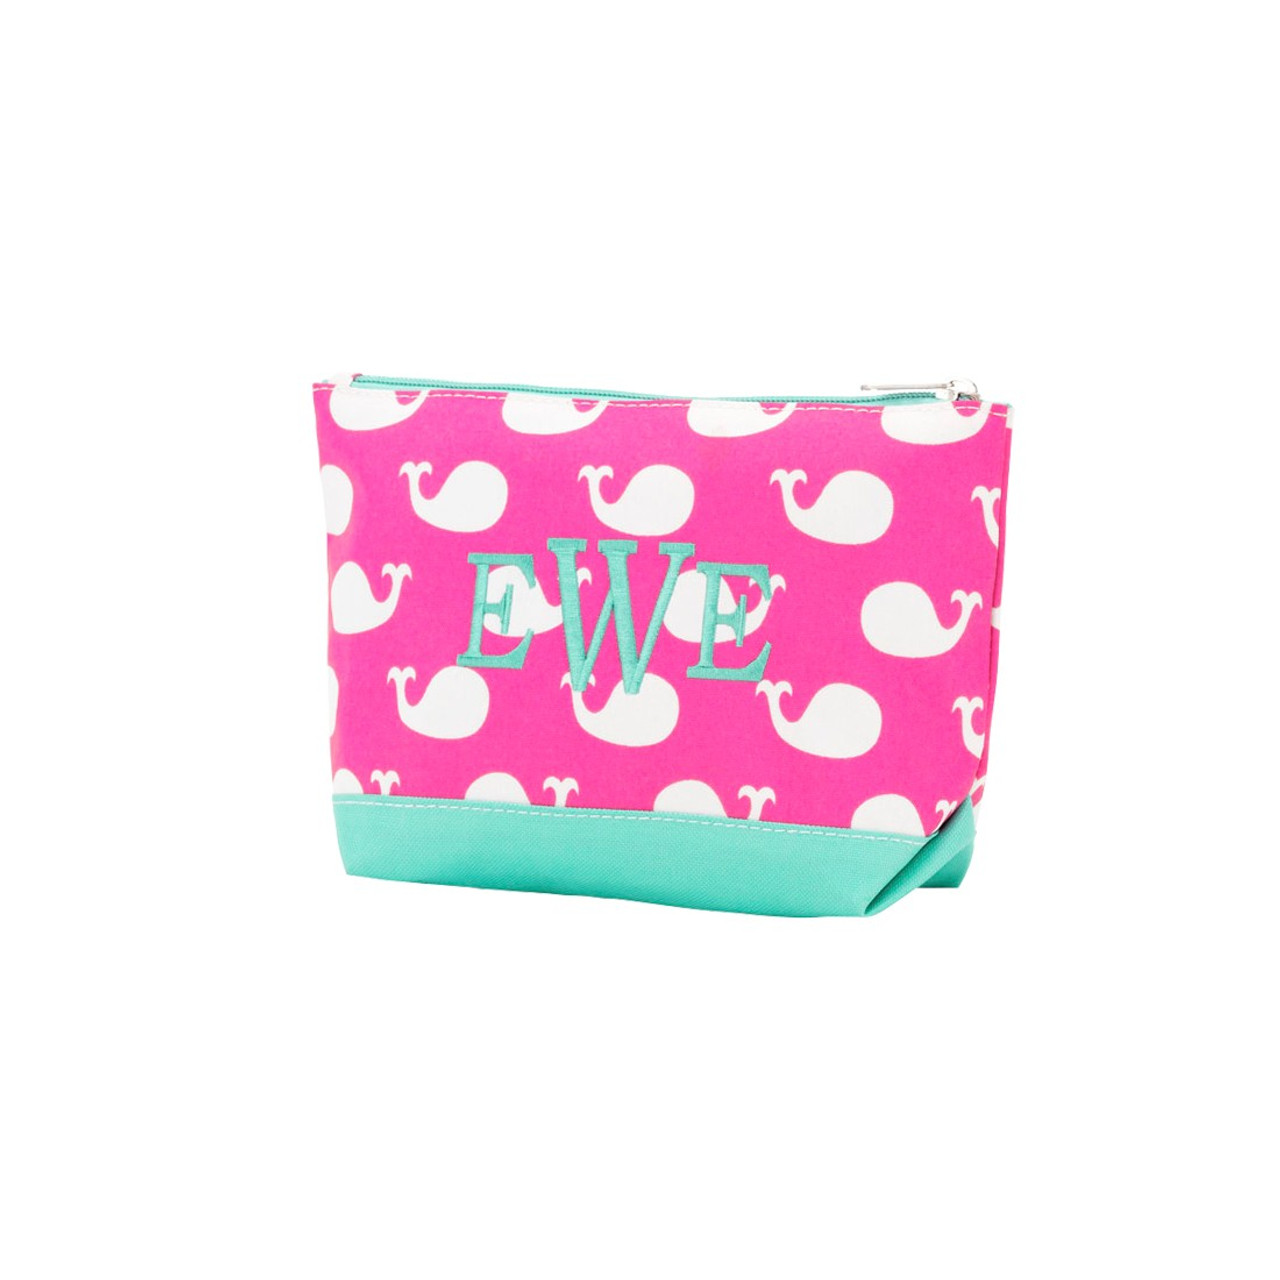 Whales Cosmetic Bag